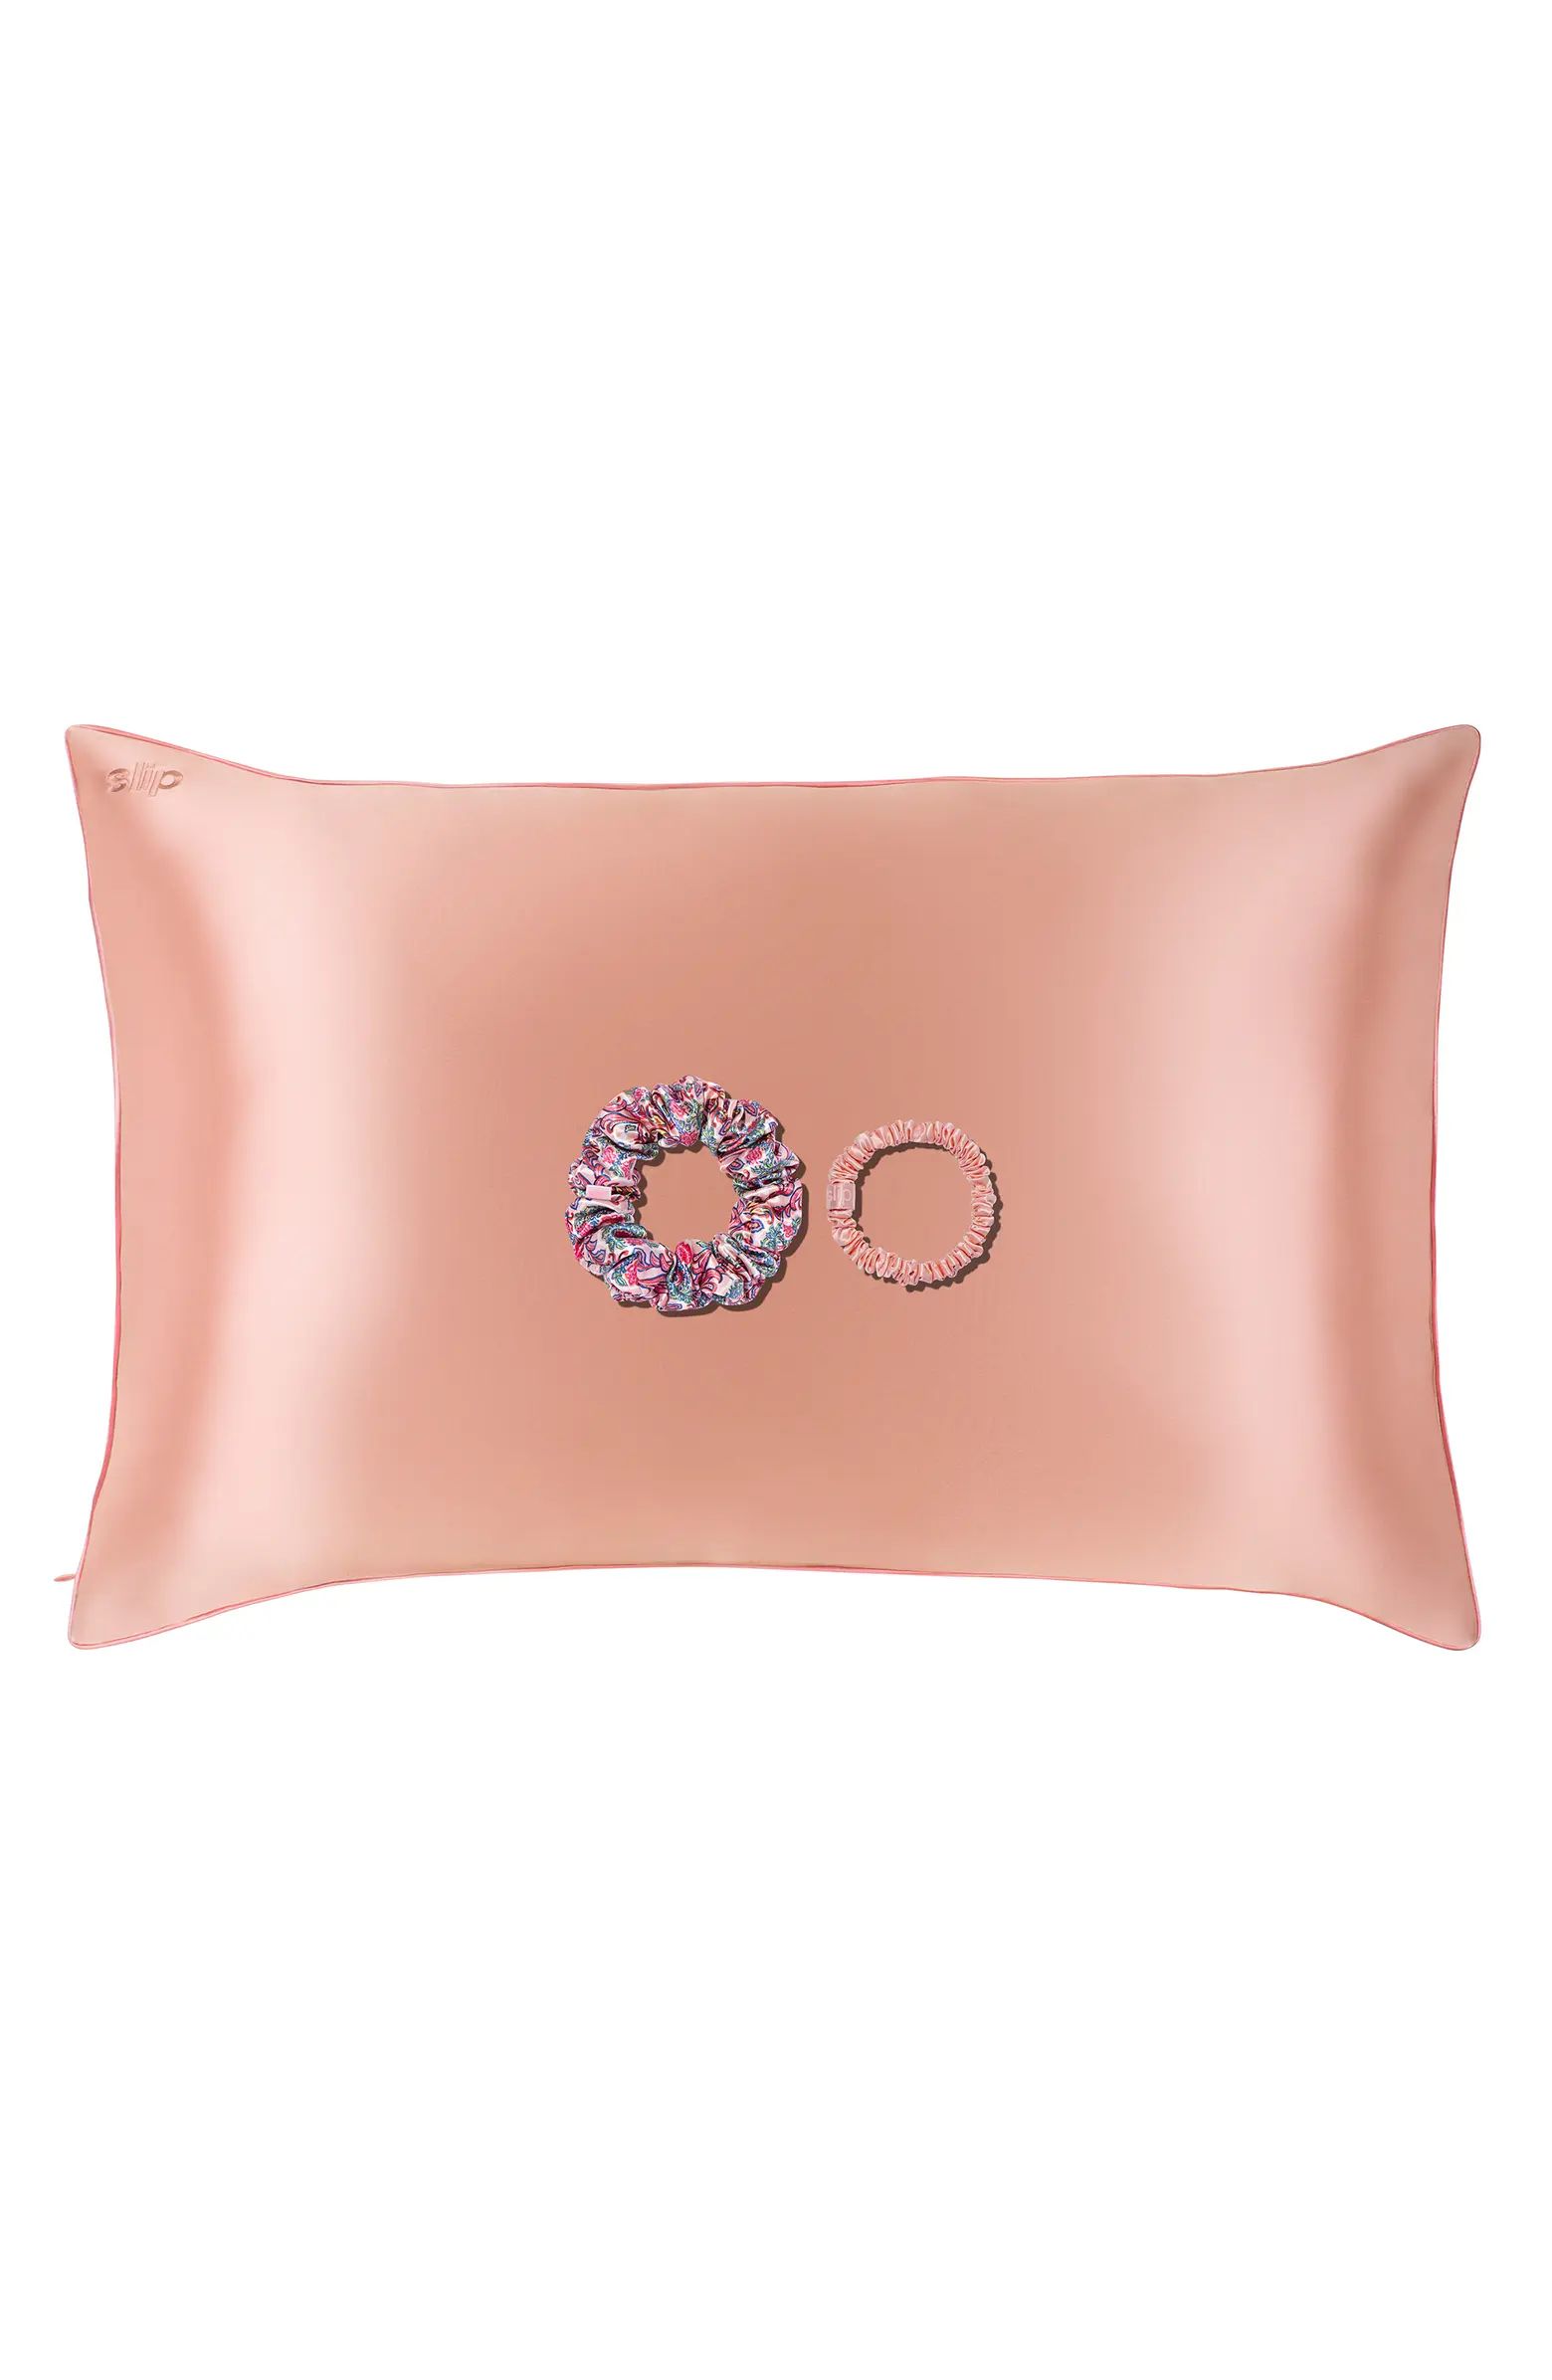 Chelsea Pure Silk Queen Pillowcase & Scrunchie Set (Limited Edition) $108 Value | Nordstrom